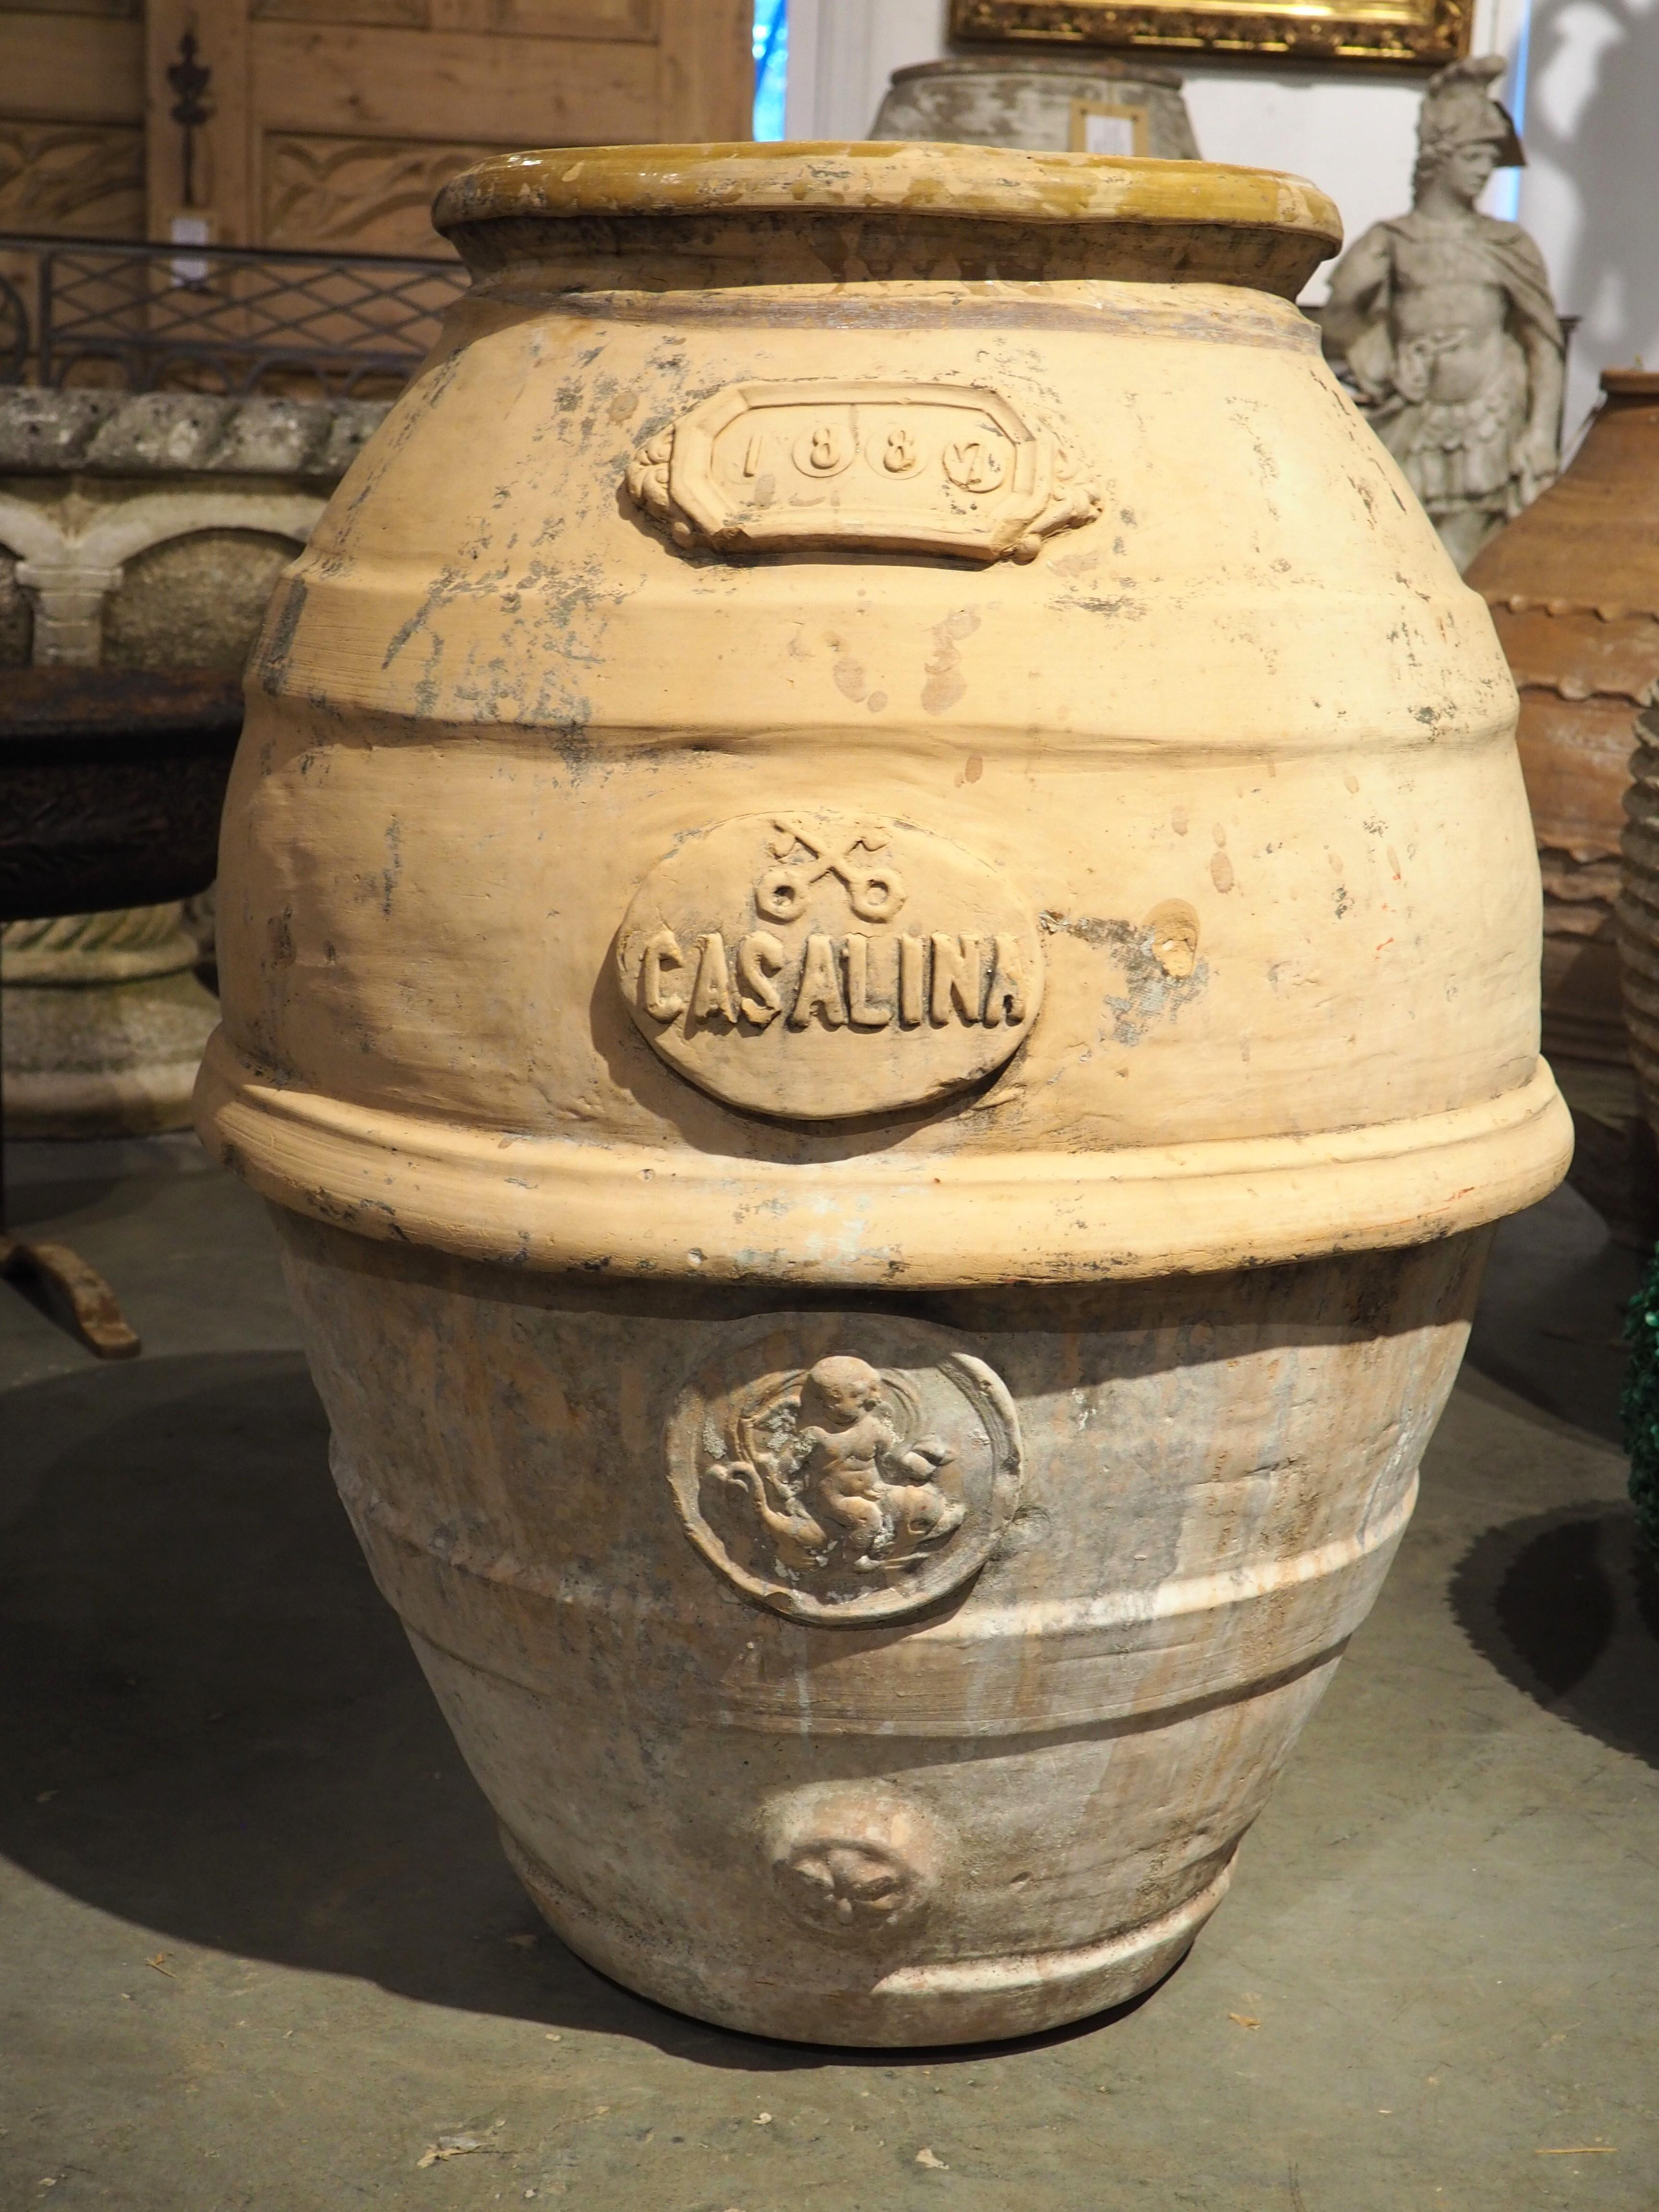 Italian Antique Terra Cotta Oil or Grains Jar from Casalina, Italy, Dated 1887